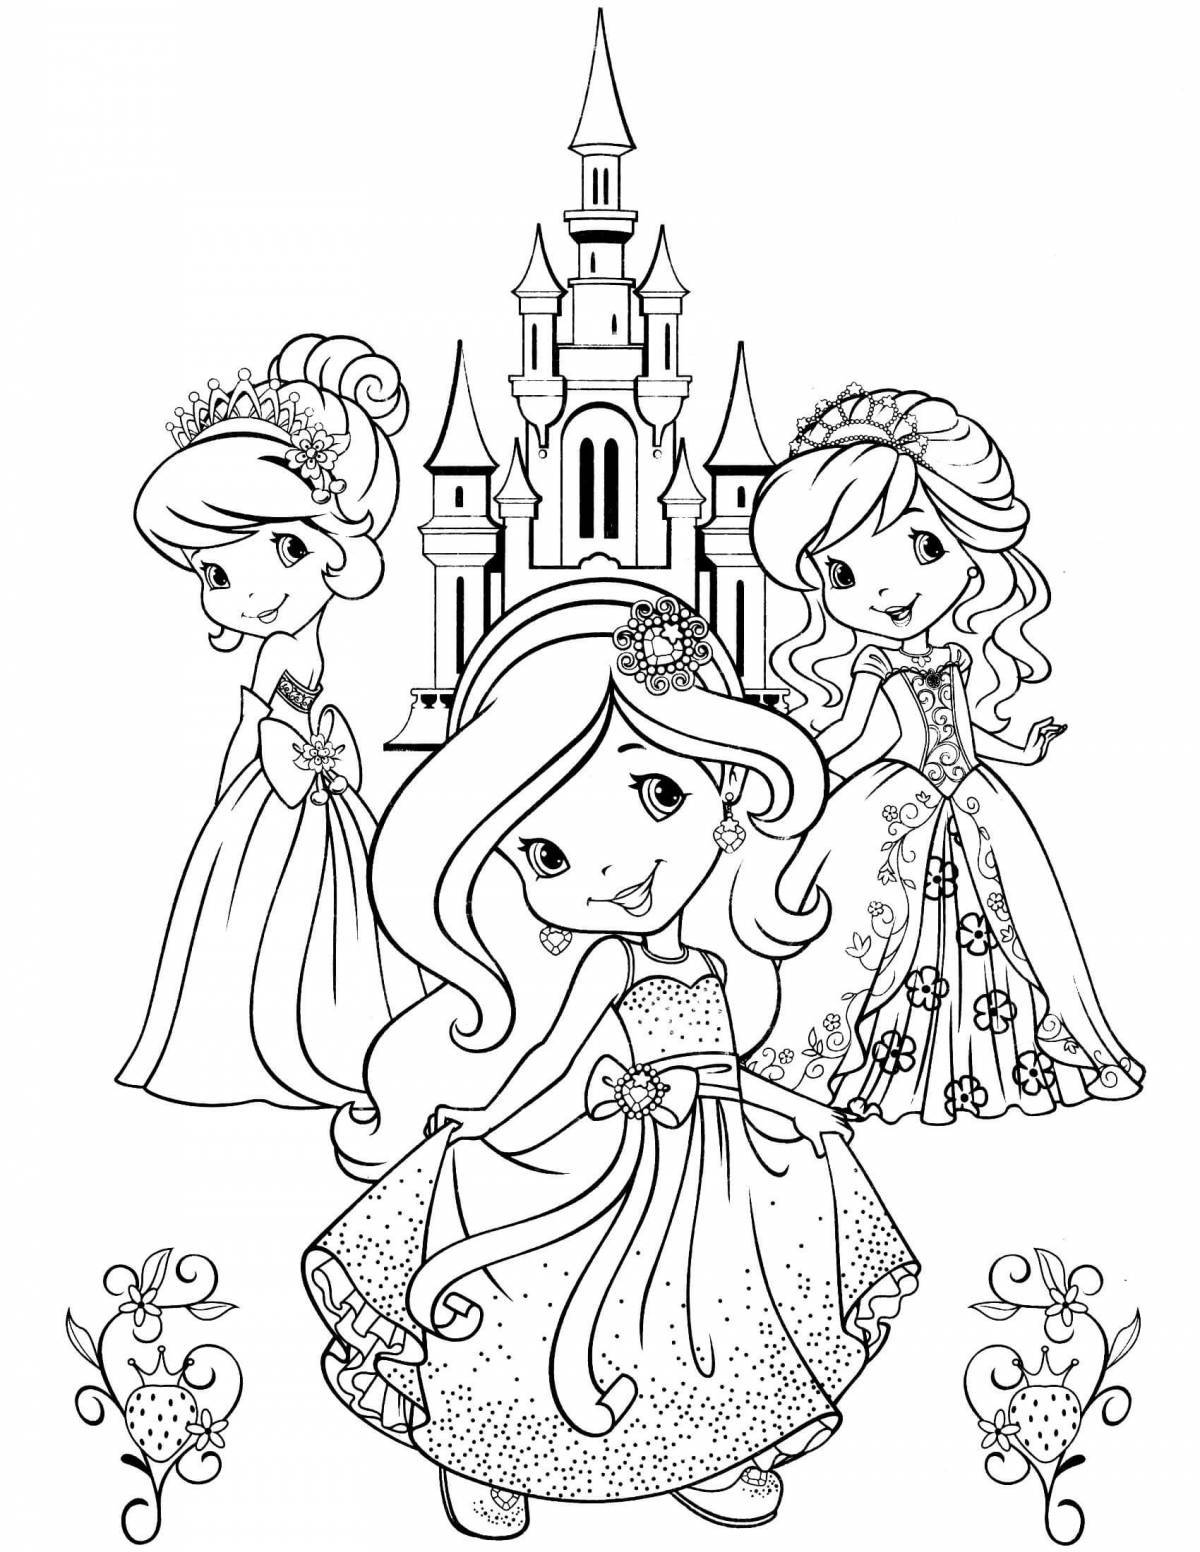 Playful princess coloring book for 3-4 year olds